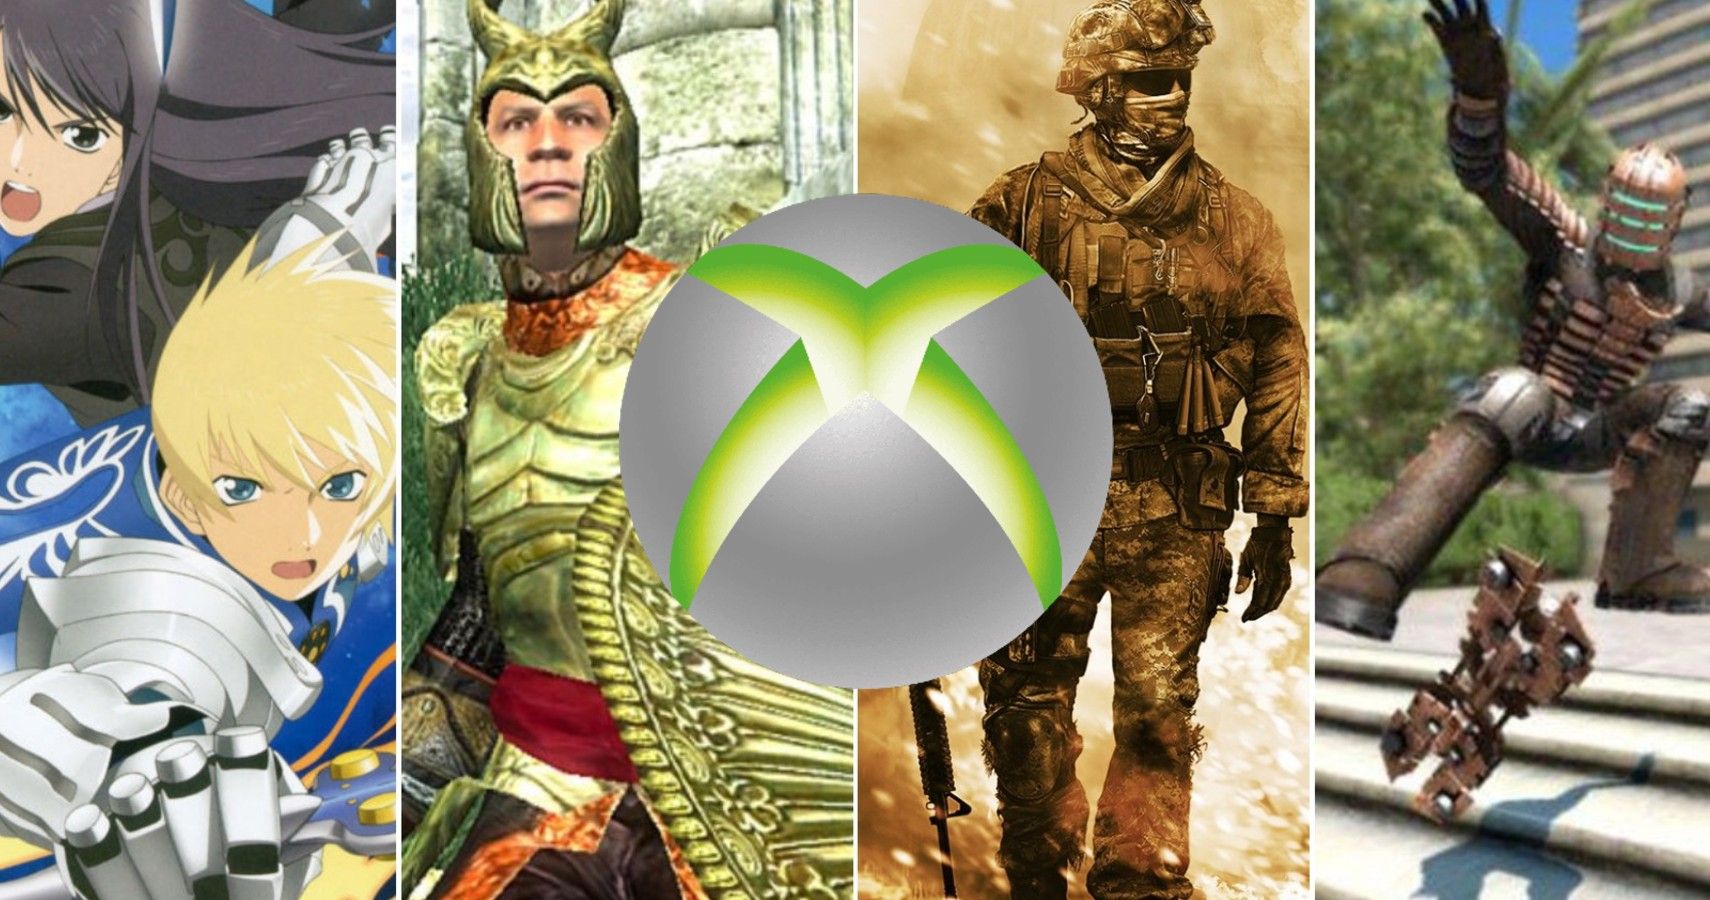 What was the last game made for Xbox 360? - Quora